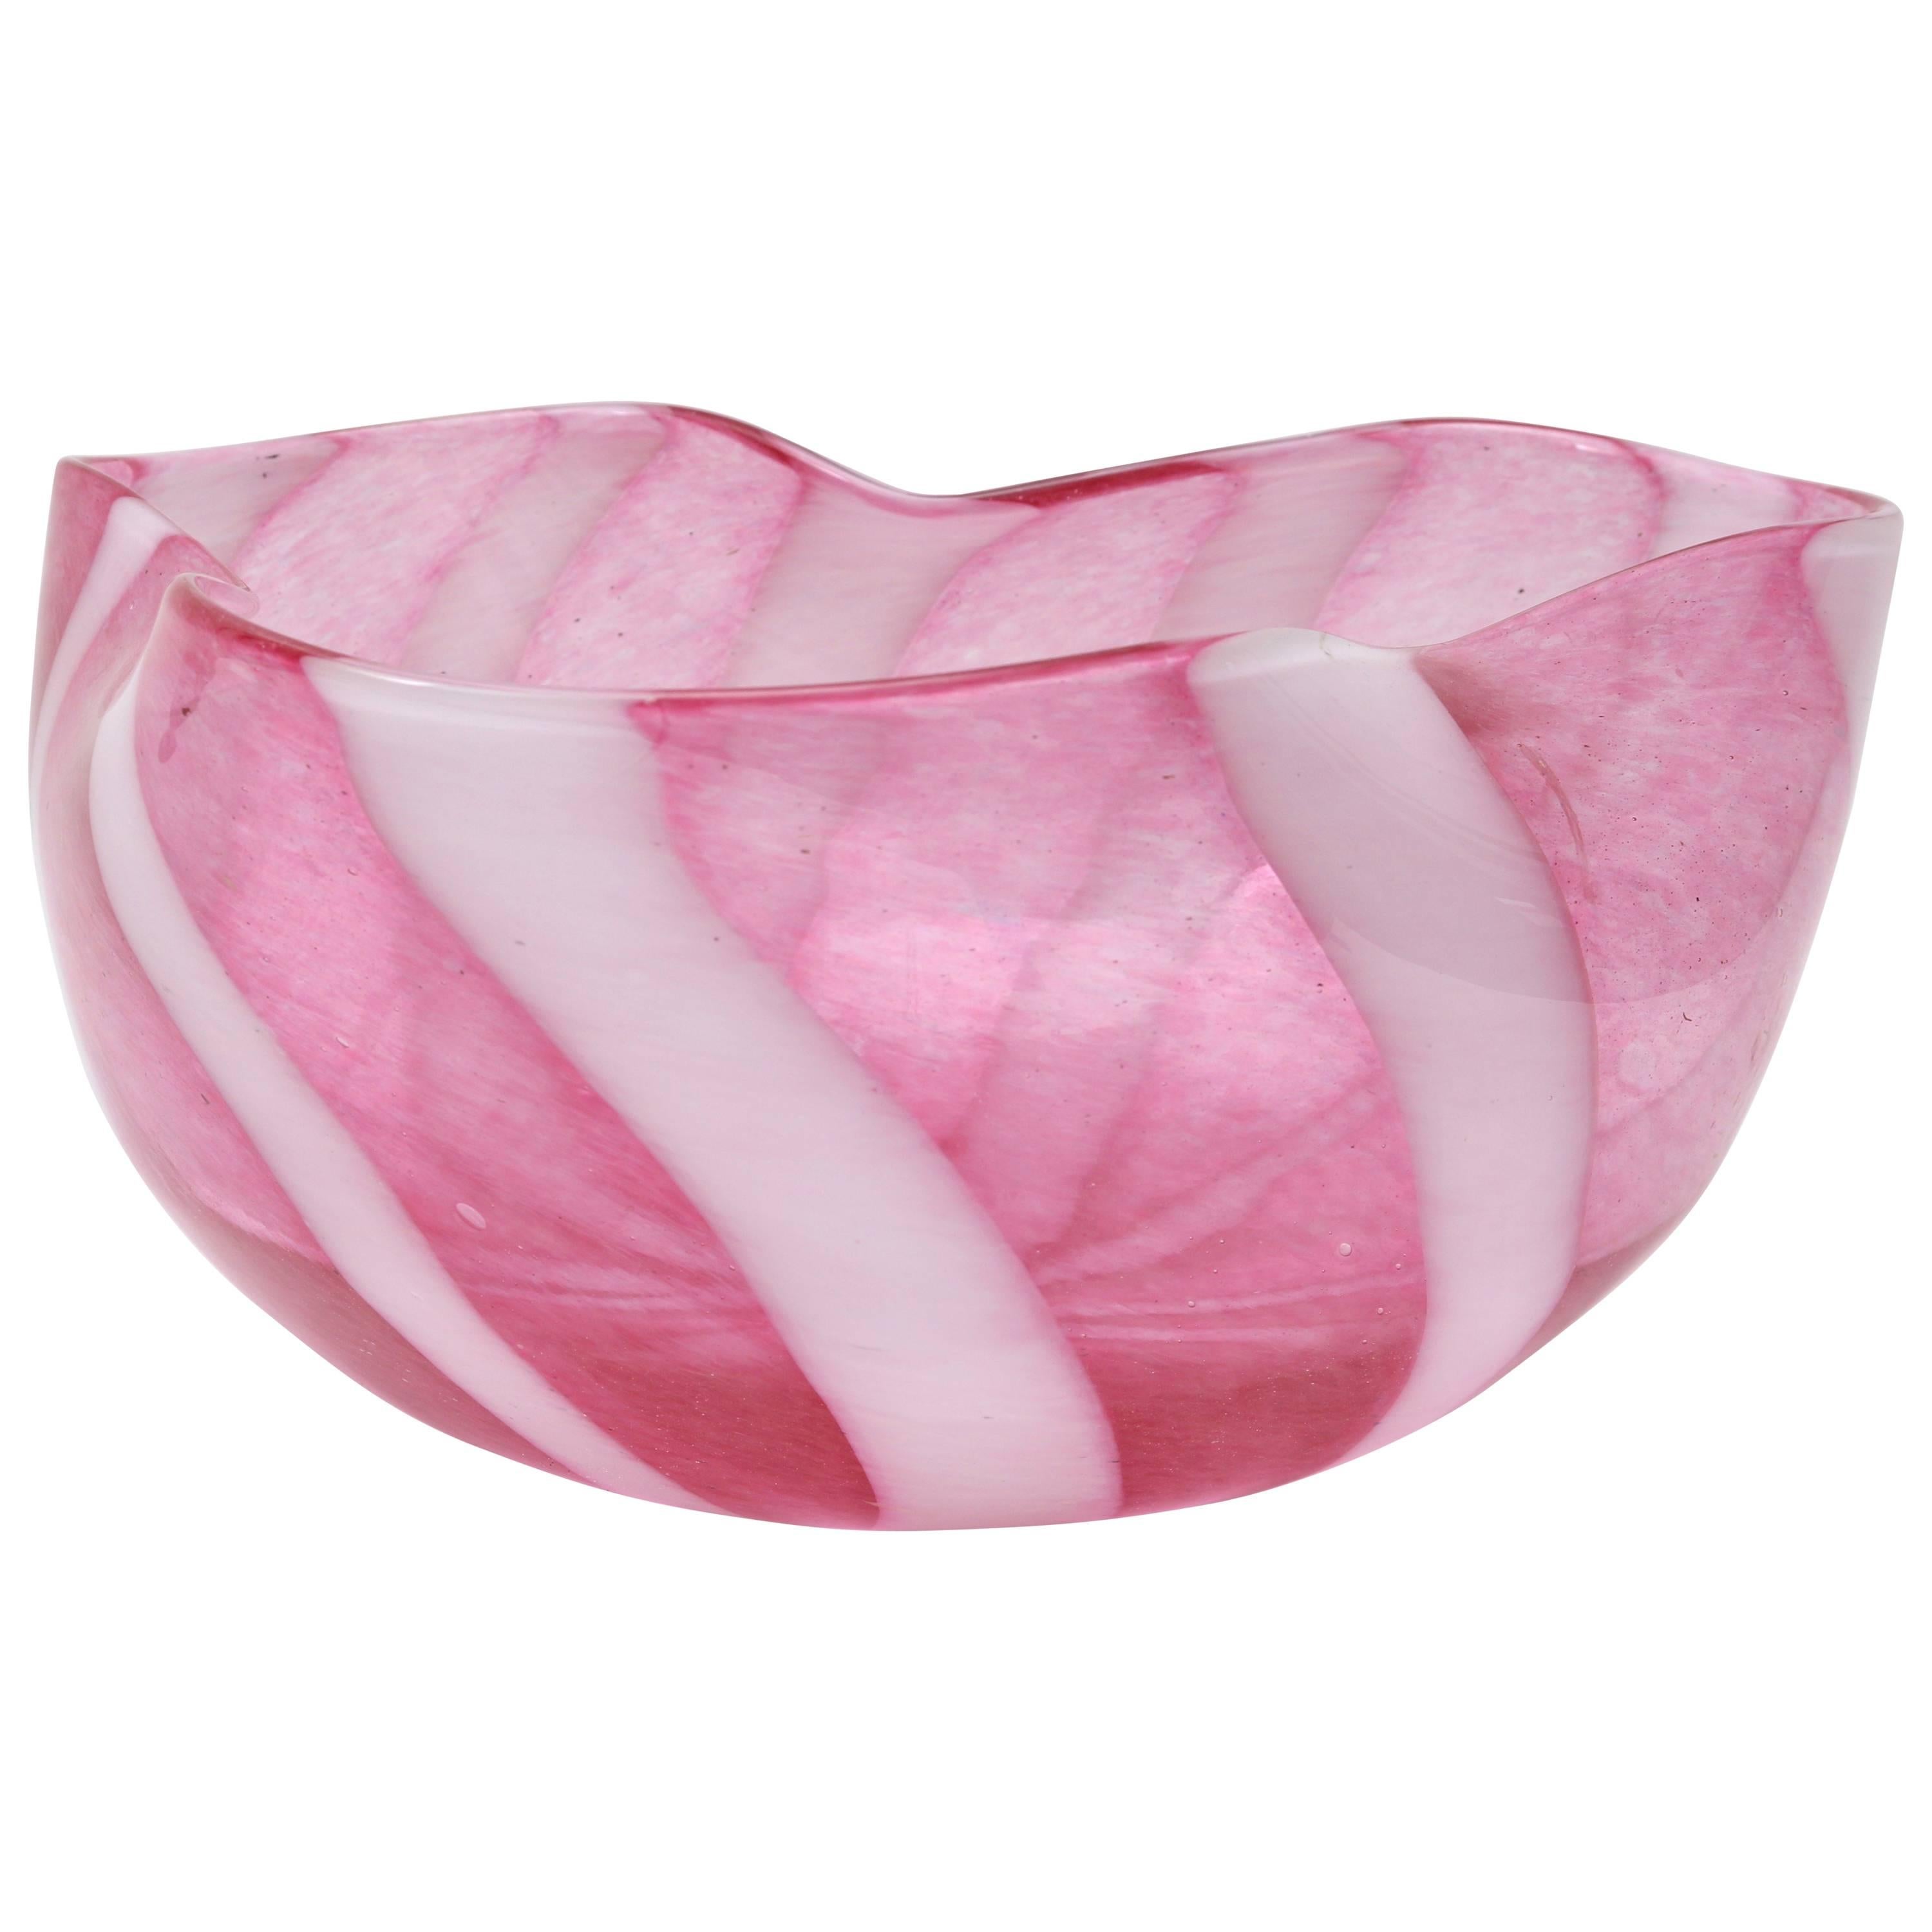  Murano Glass Bowl with Swirl Pattern in a Raspberry and White Coloration